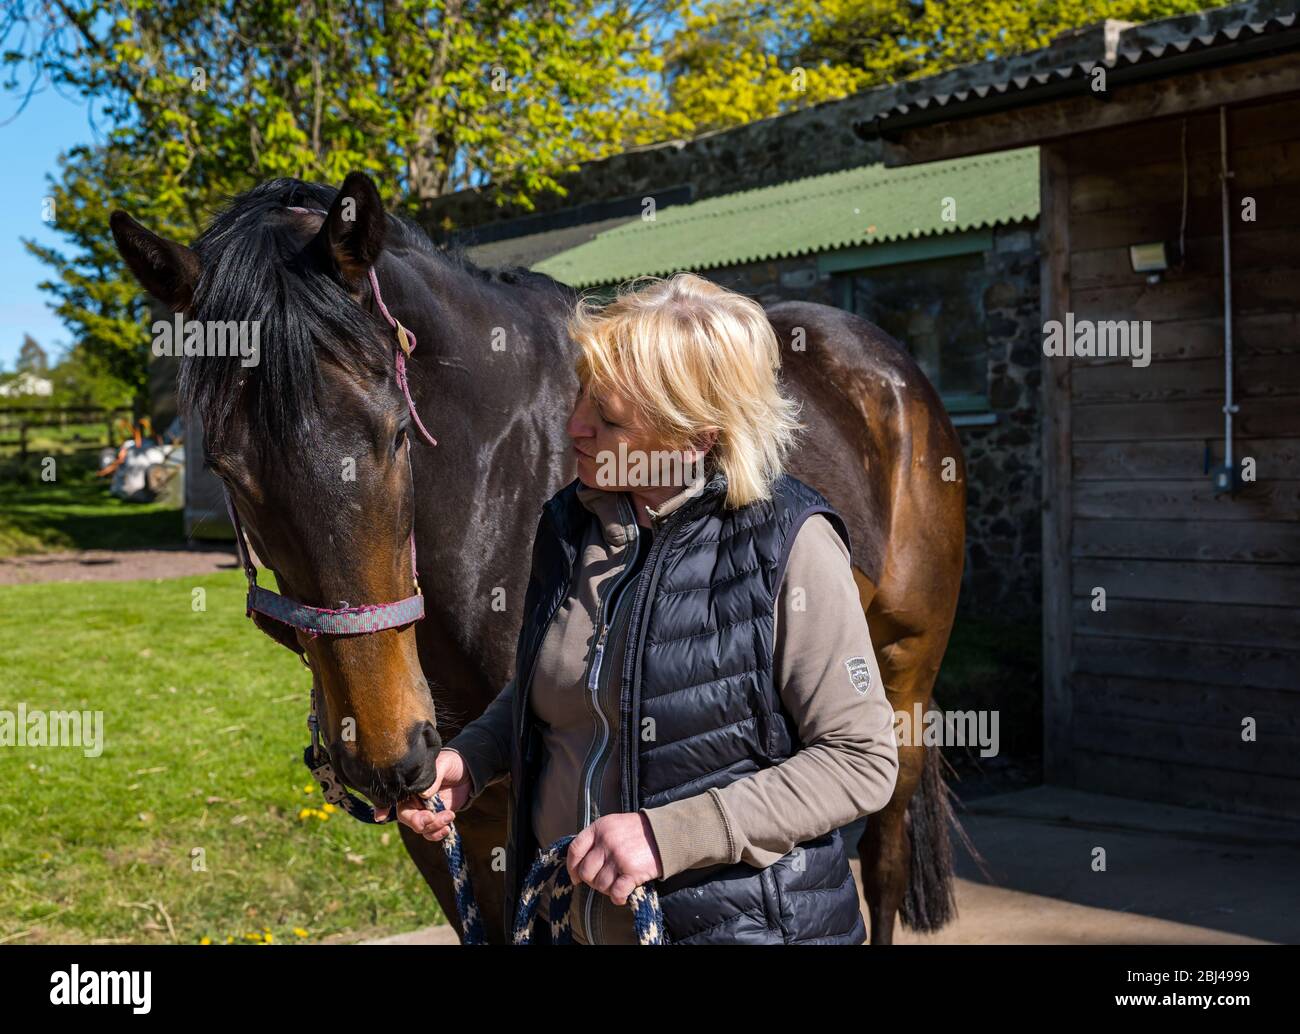 Camptoun, East Lothian, Scotland, United Kingdom. 28th Apr, 2020. A community in lockdown: residents in a small rural community show what life in lockdown is like for them. Pictured: Lorna and one of her three horses, Colin. Lorna goes into work at a local golf course a few days a week and works from home the rest of the time Stock Photo